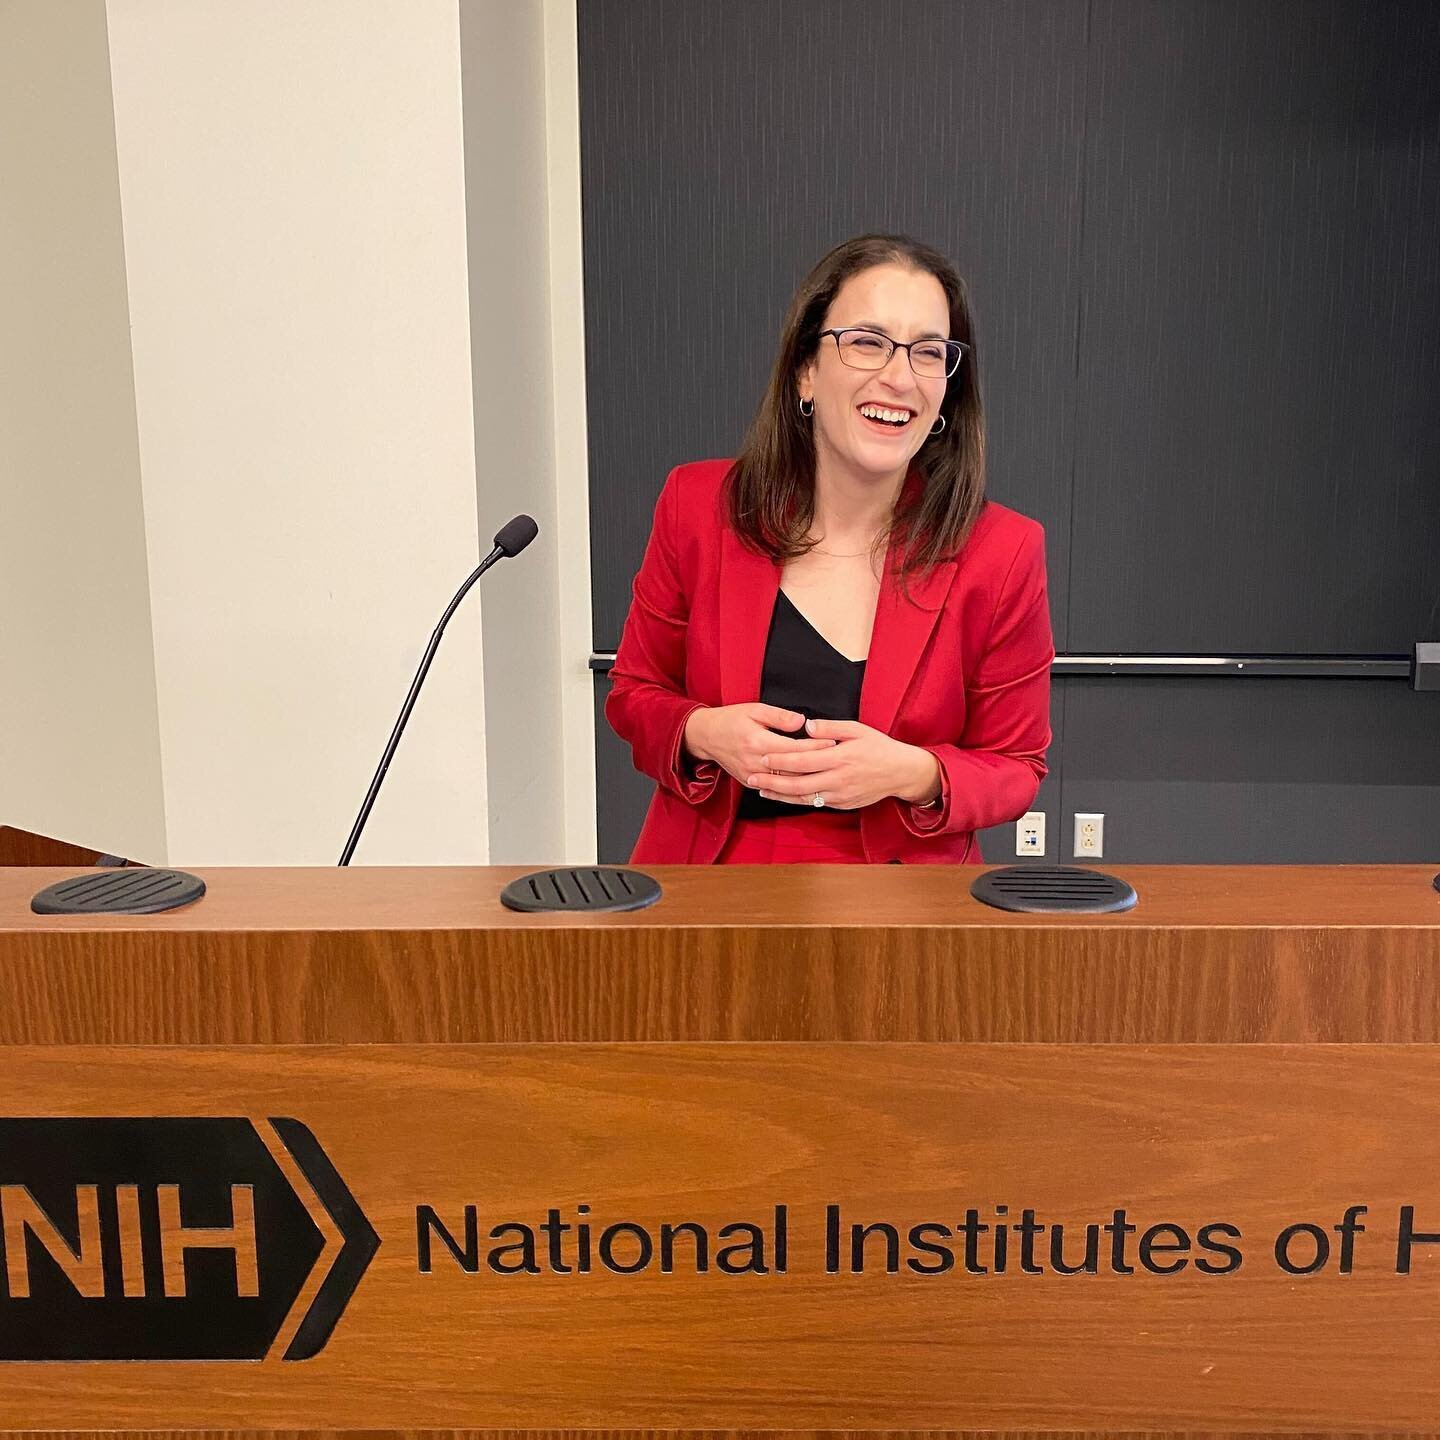 Congratulations to our very own, Dr. Susan Perlman, on her talk at the NIH today! In her talk, Dr. Perlman spoke about the LCBD&rsquo;s multi-modal research on preschool-aged children. 🎉🧠